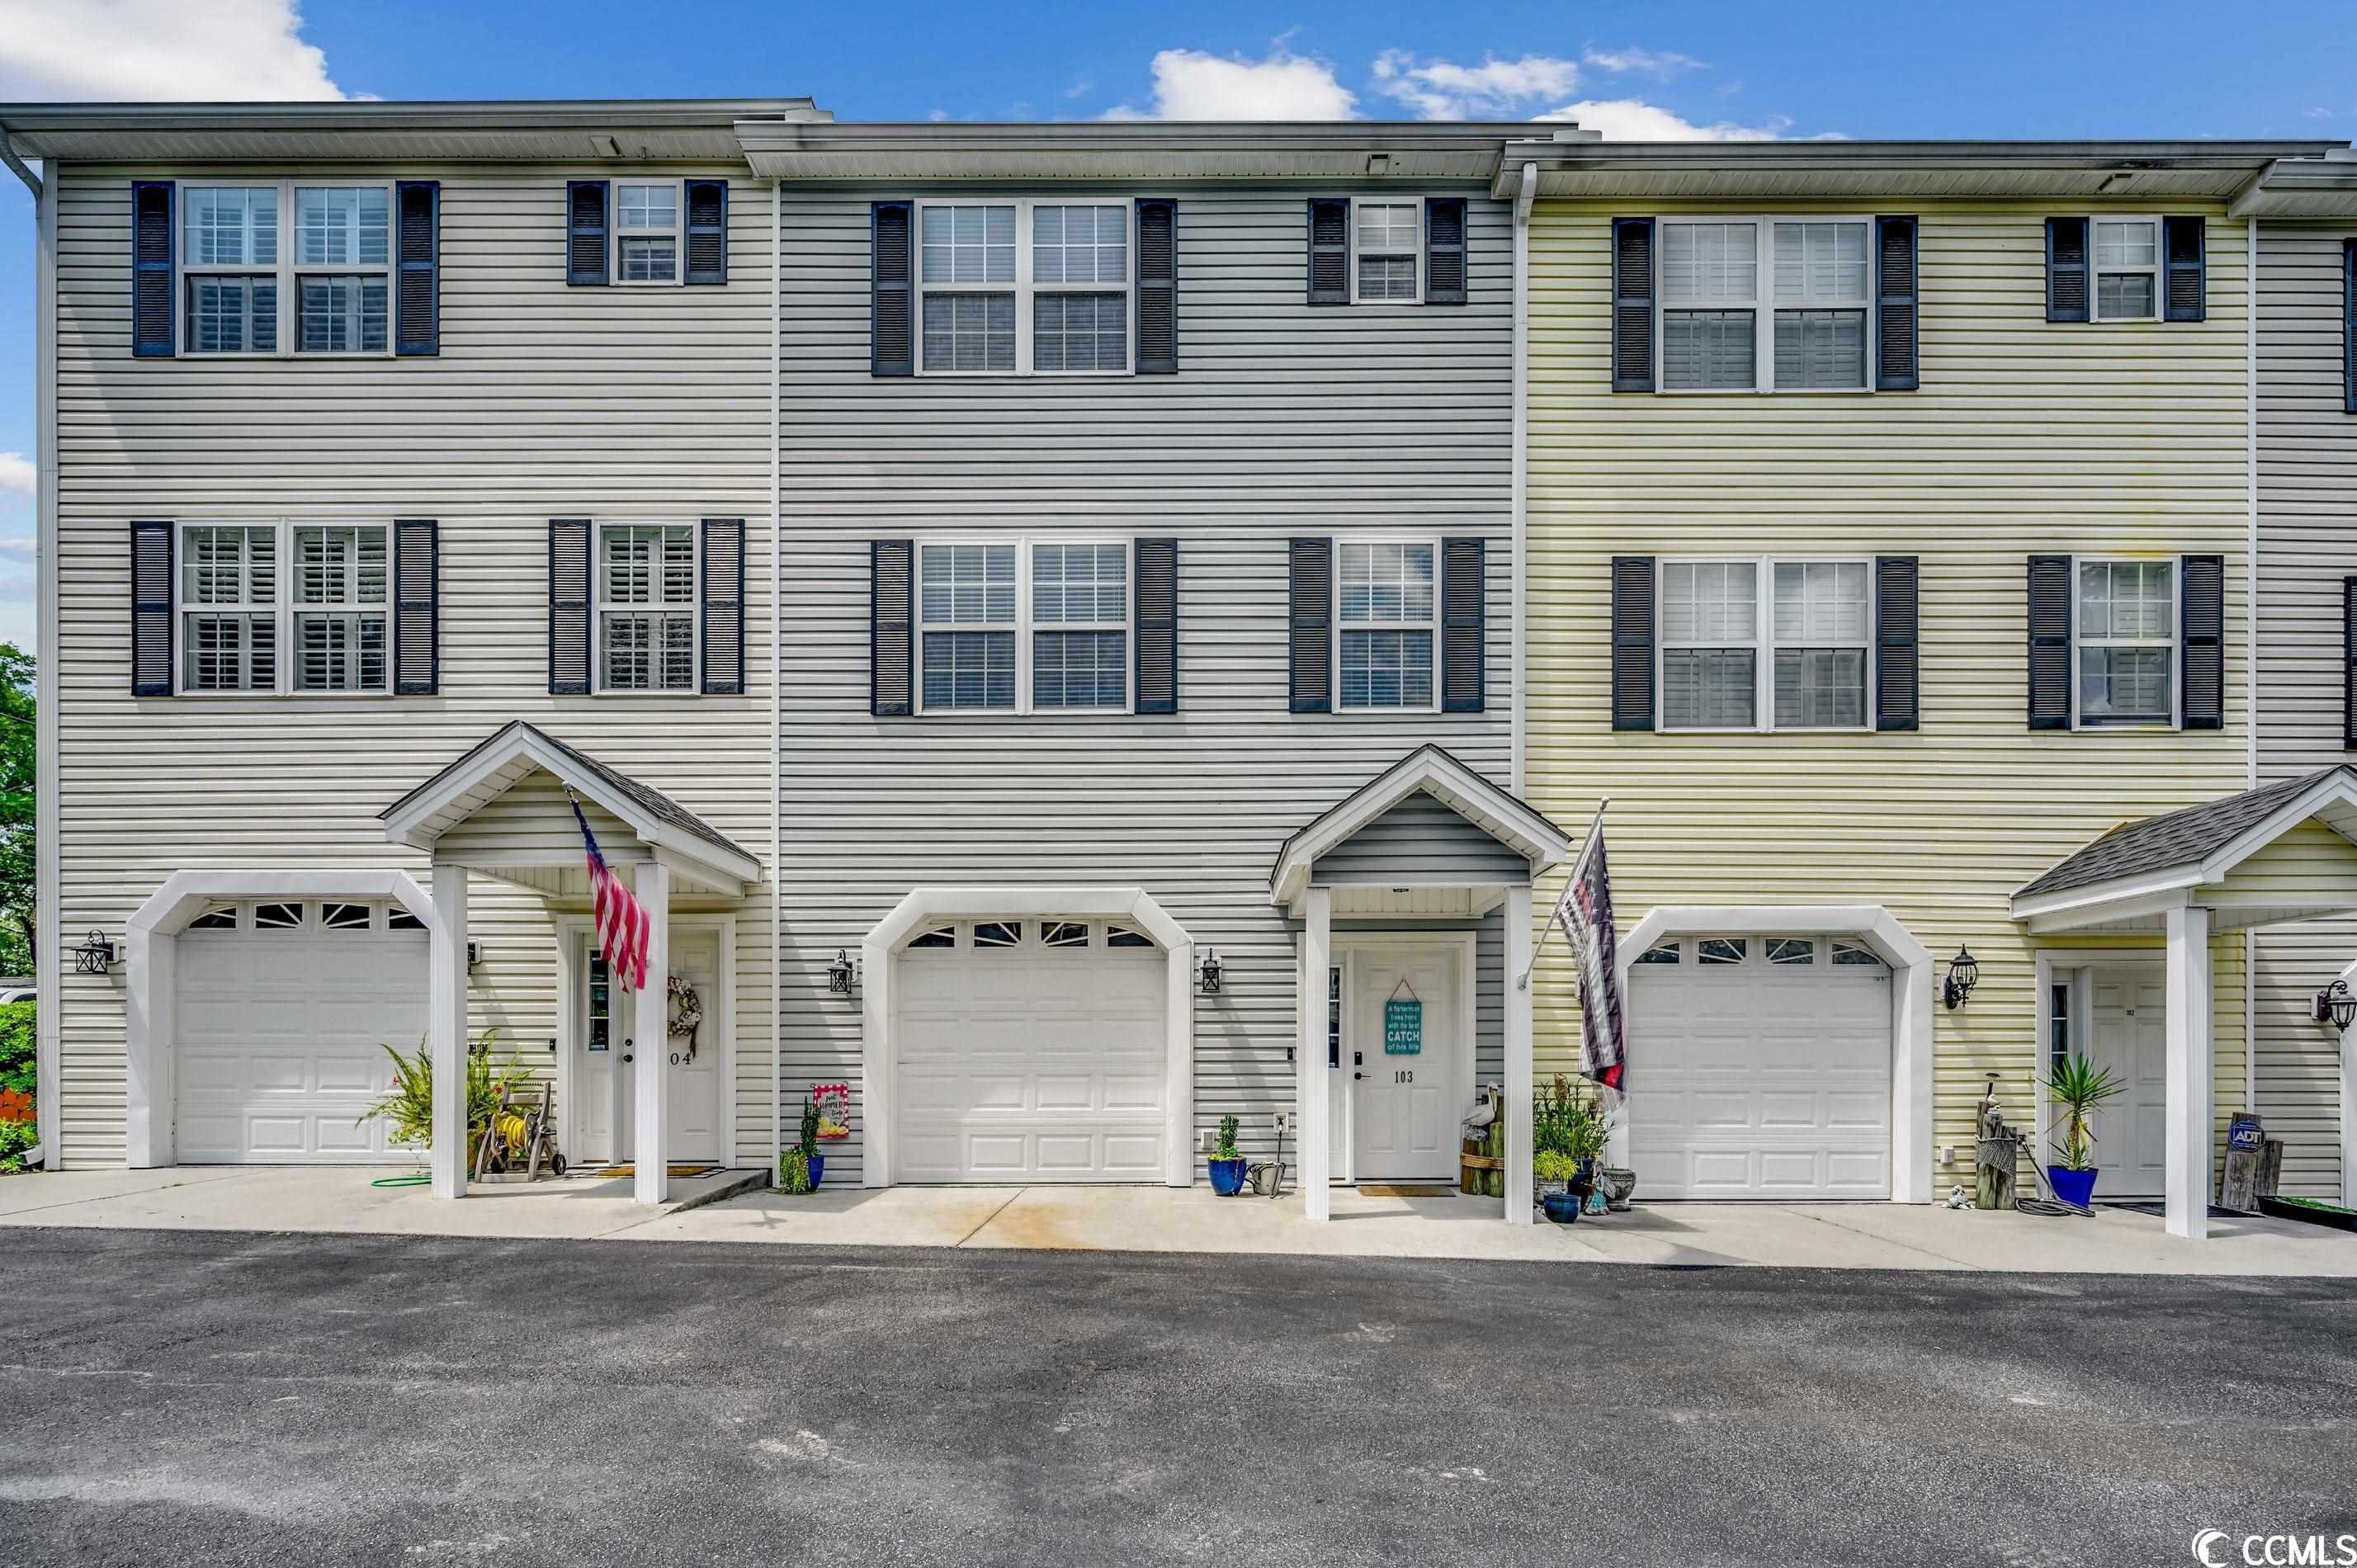 Photo 1 of 32 of 2428 Little River Neck Rd. Unit 103 townhome